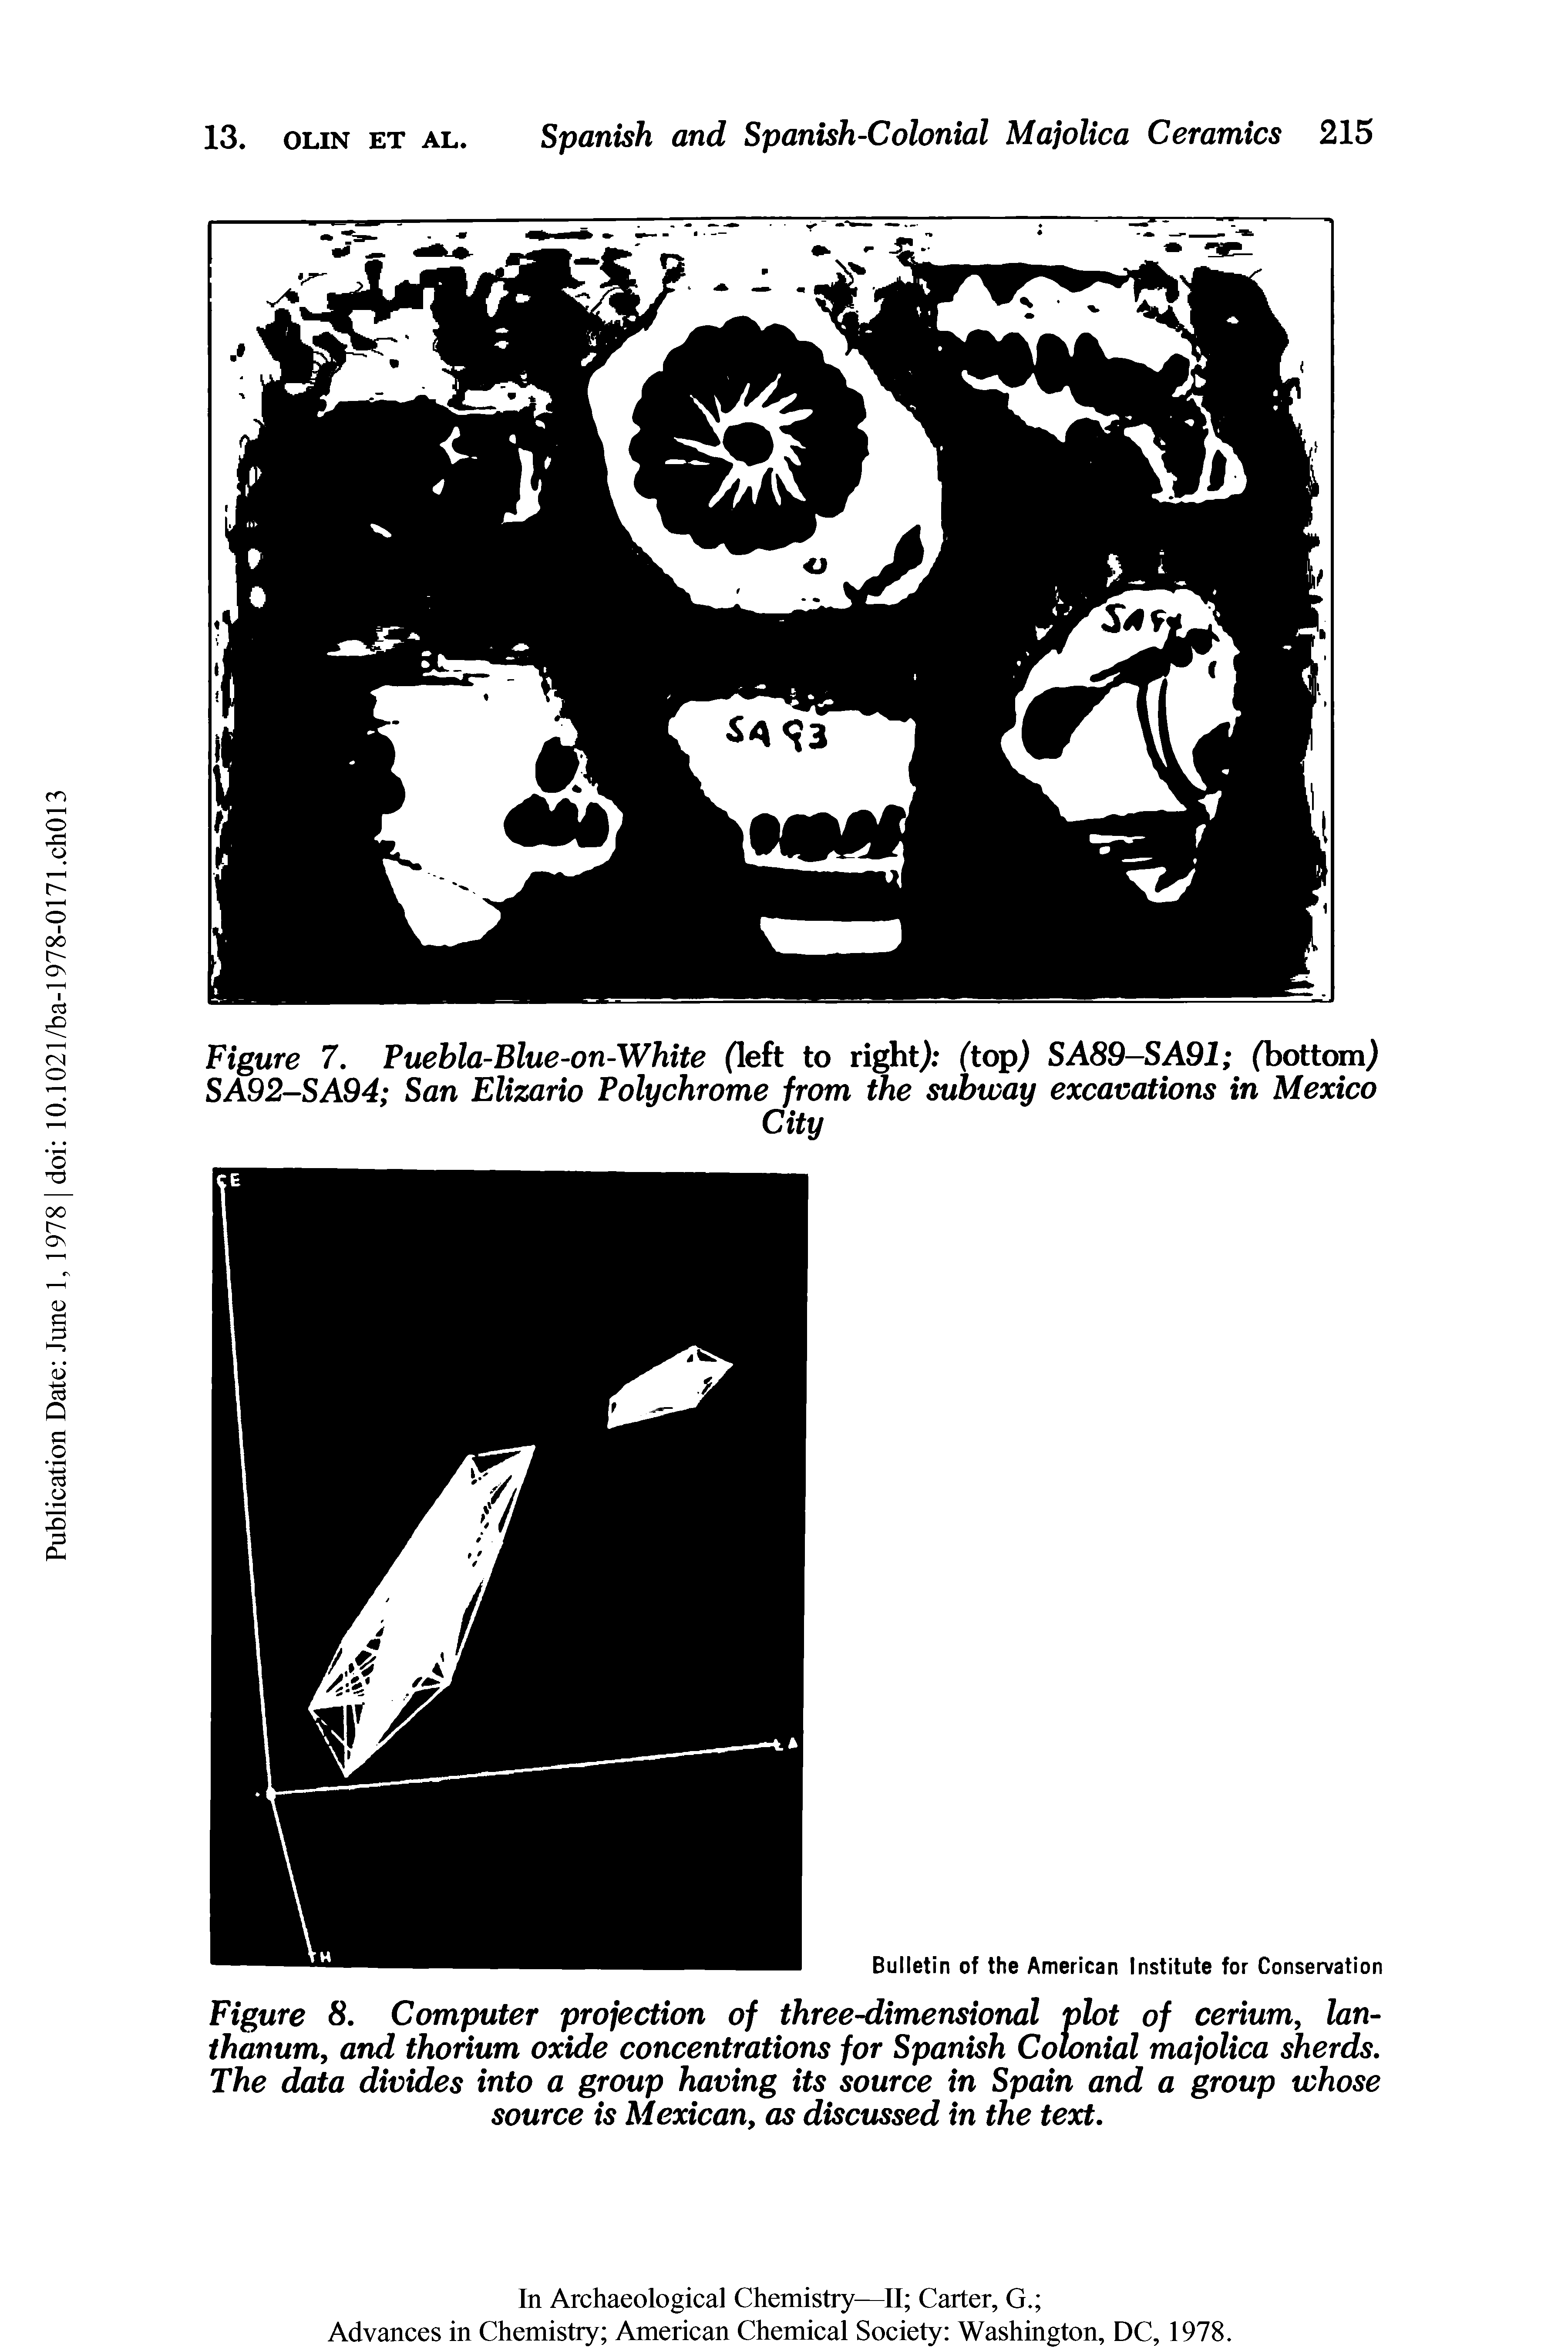 Figure 8. Computer projection of three-dimensional plot of cerium, lanthanum, and thorium oxide concentrations for Spanish Colonial majolica sherds. The data divides into a group having its source in Spain and a group whose source is Mexican, as discussed in the text.